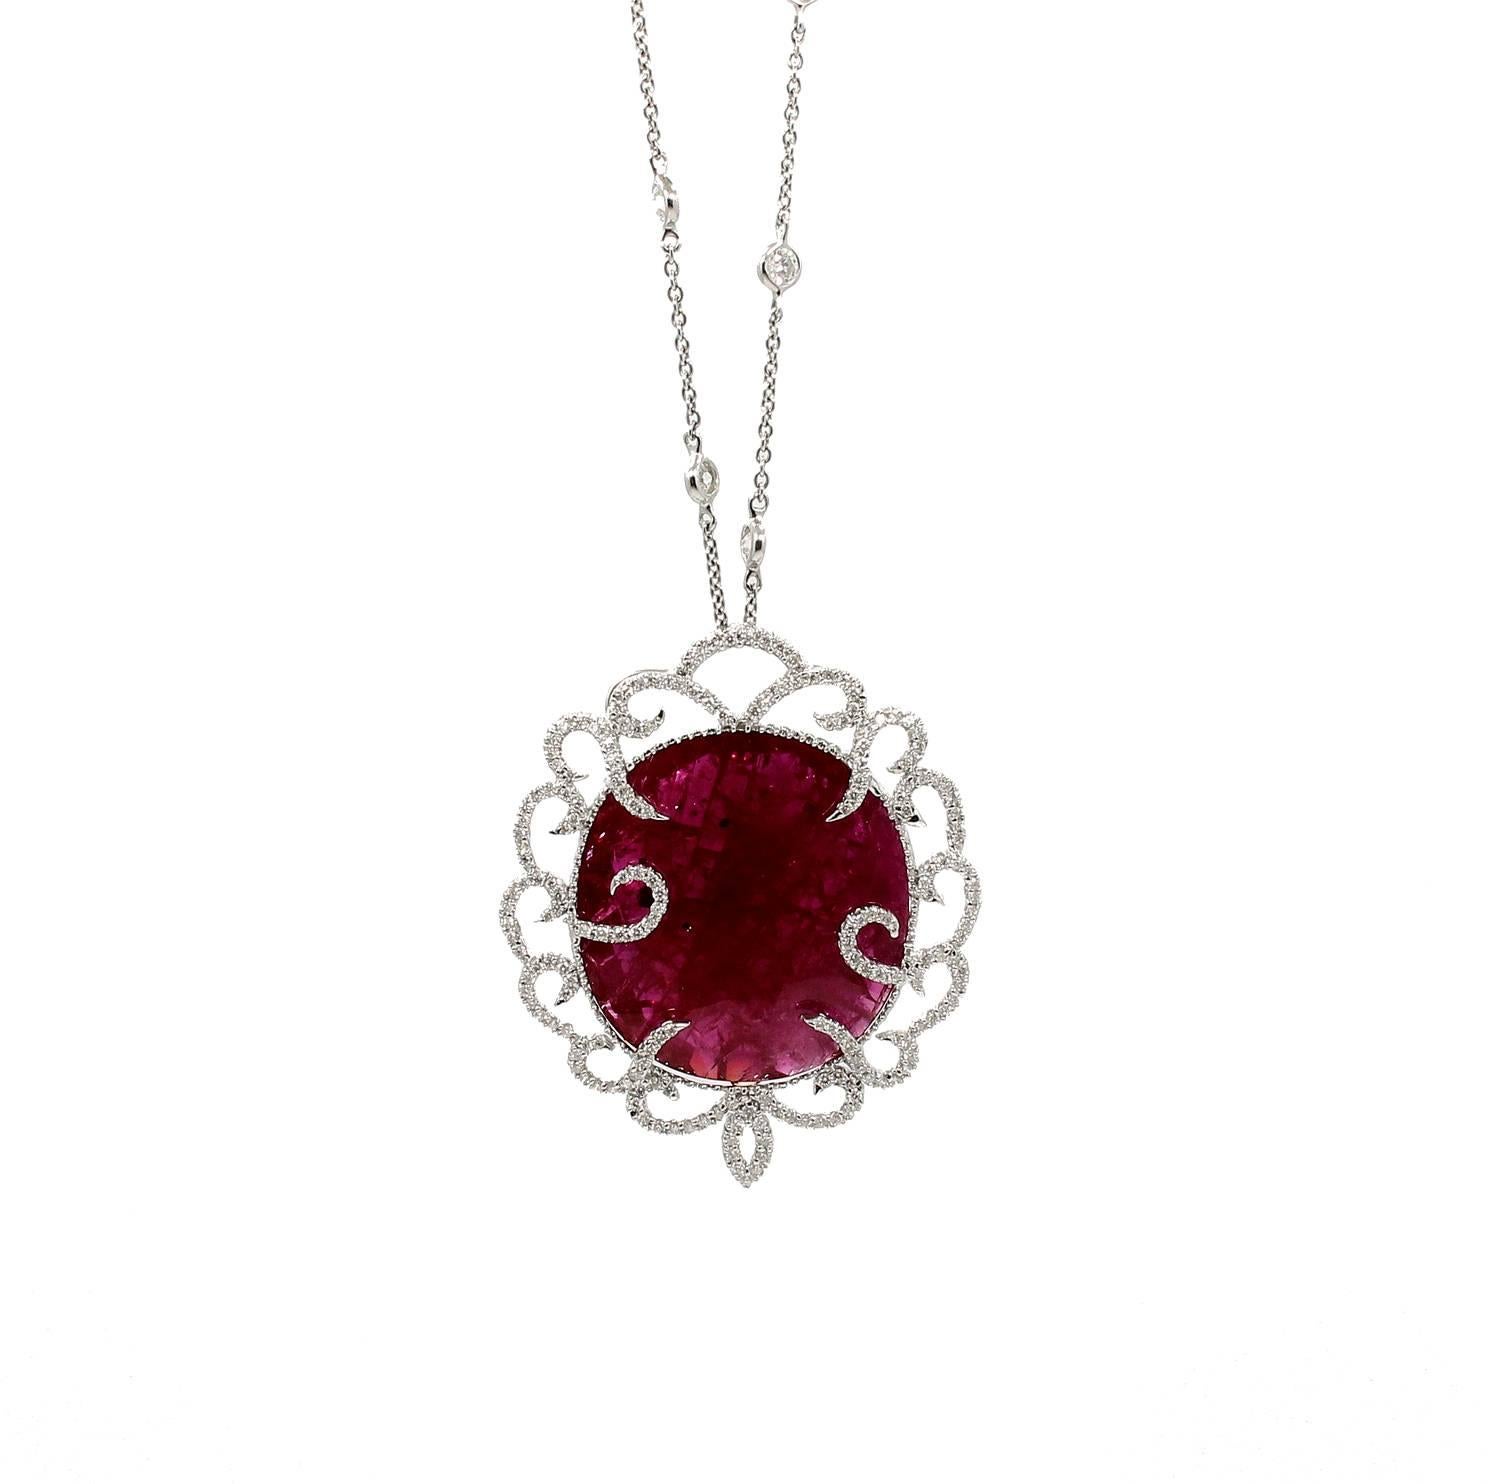 18K White Gold Diamond Station Necklace with Ruby Slice and Diamond Pendant. This unique Pendant has a center ruby slice which equals 53.96 carats and is surrounded by round brilliant diamonds. The necklace is a 20 inches Diamond Station Necklace